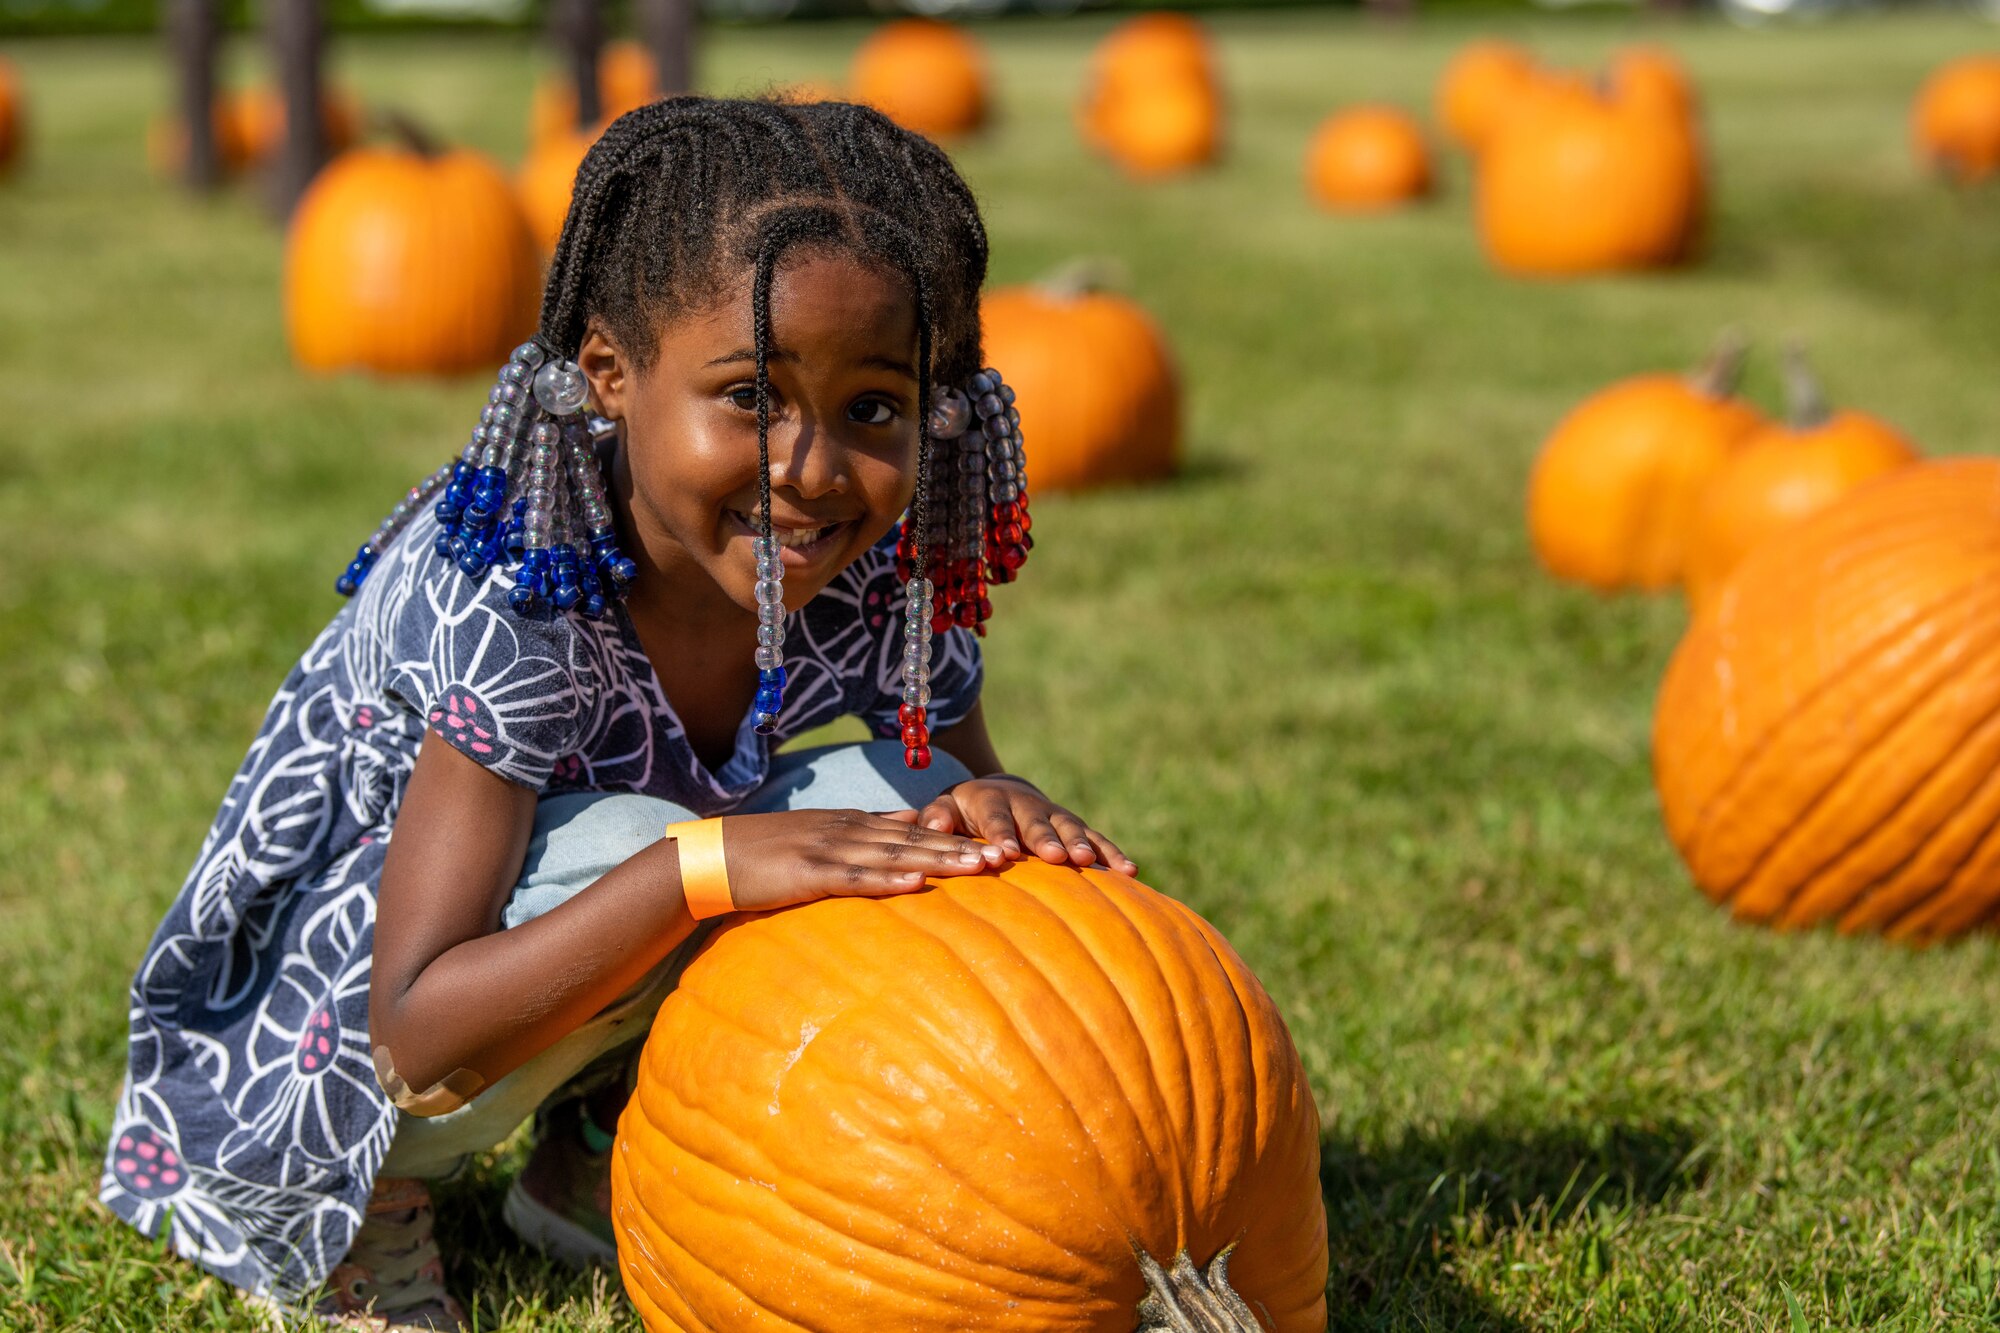 A little girl poses for a photo in a pumpkin patch